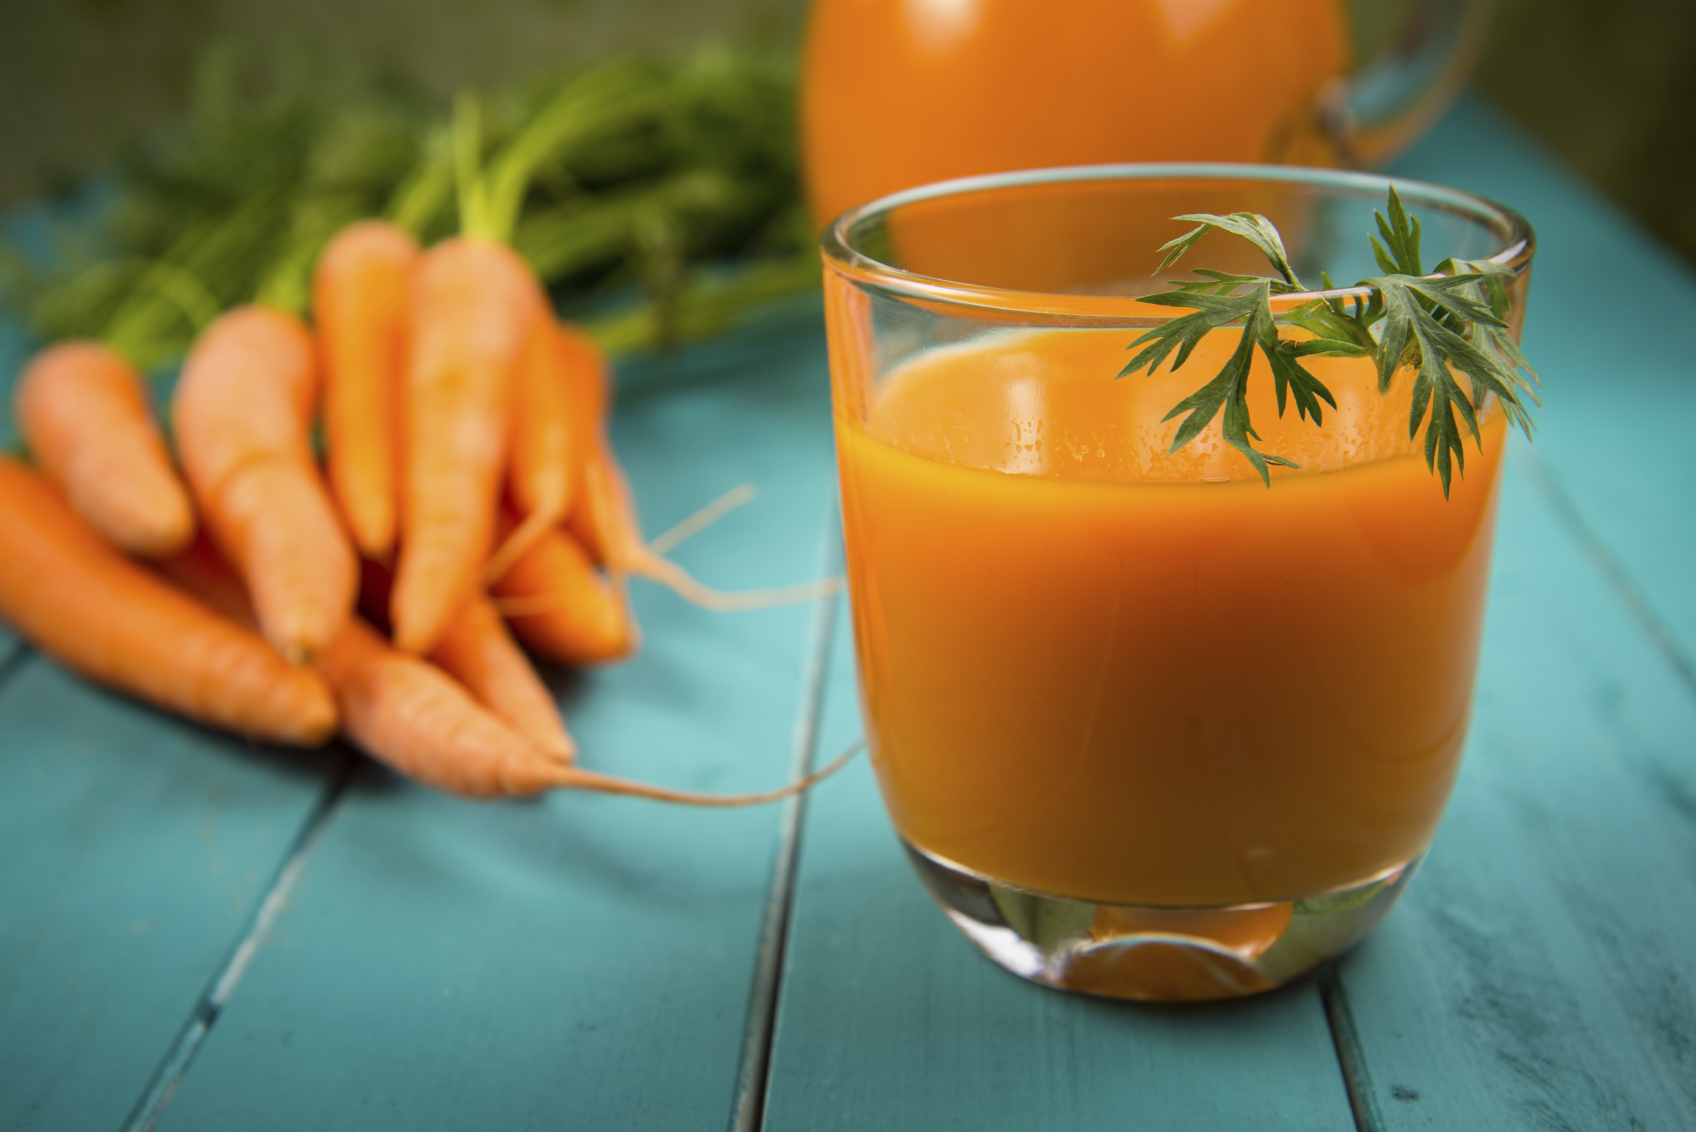 Simple Recipe To Make Carrot Juice With Milk From Balangan City